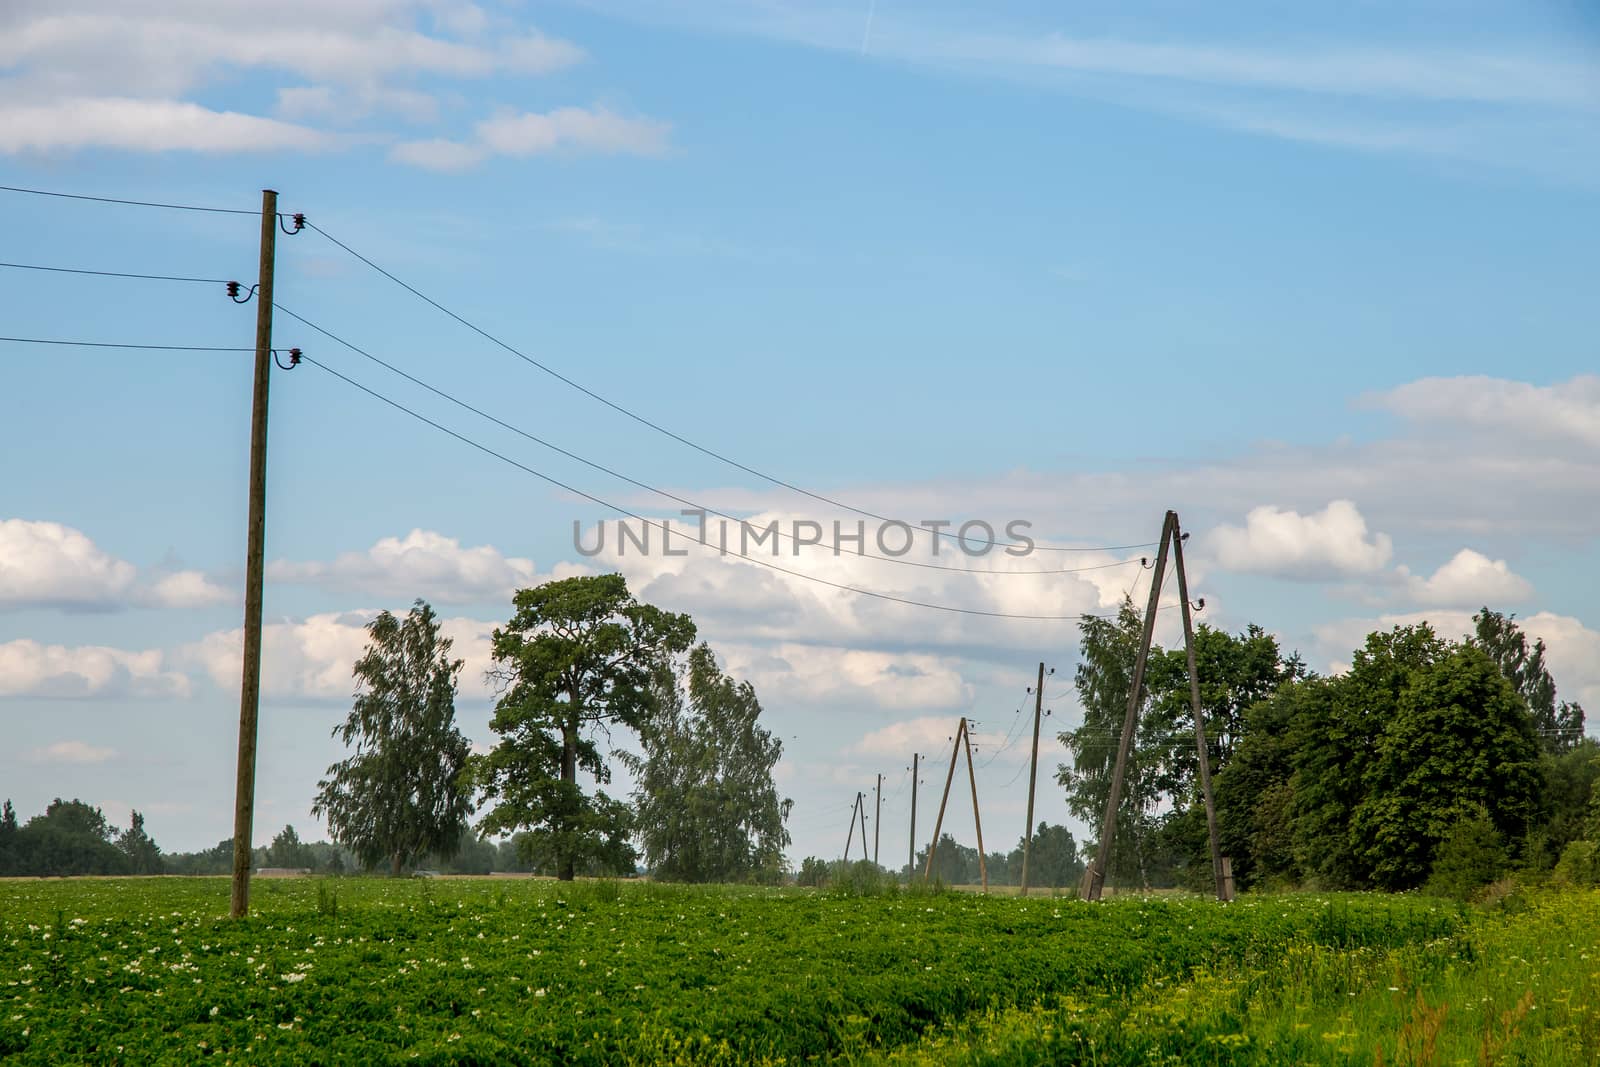 Potatoes plants with white flowers growing on farmers field. Landscape with flowering potatoes. Summer landscape with green field, trees and blue sky. Classic rural landscape in Latvia.